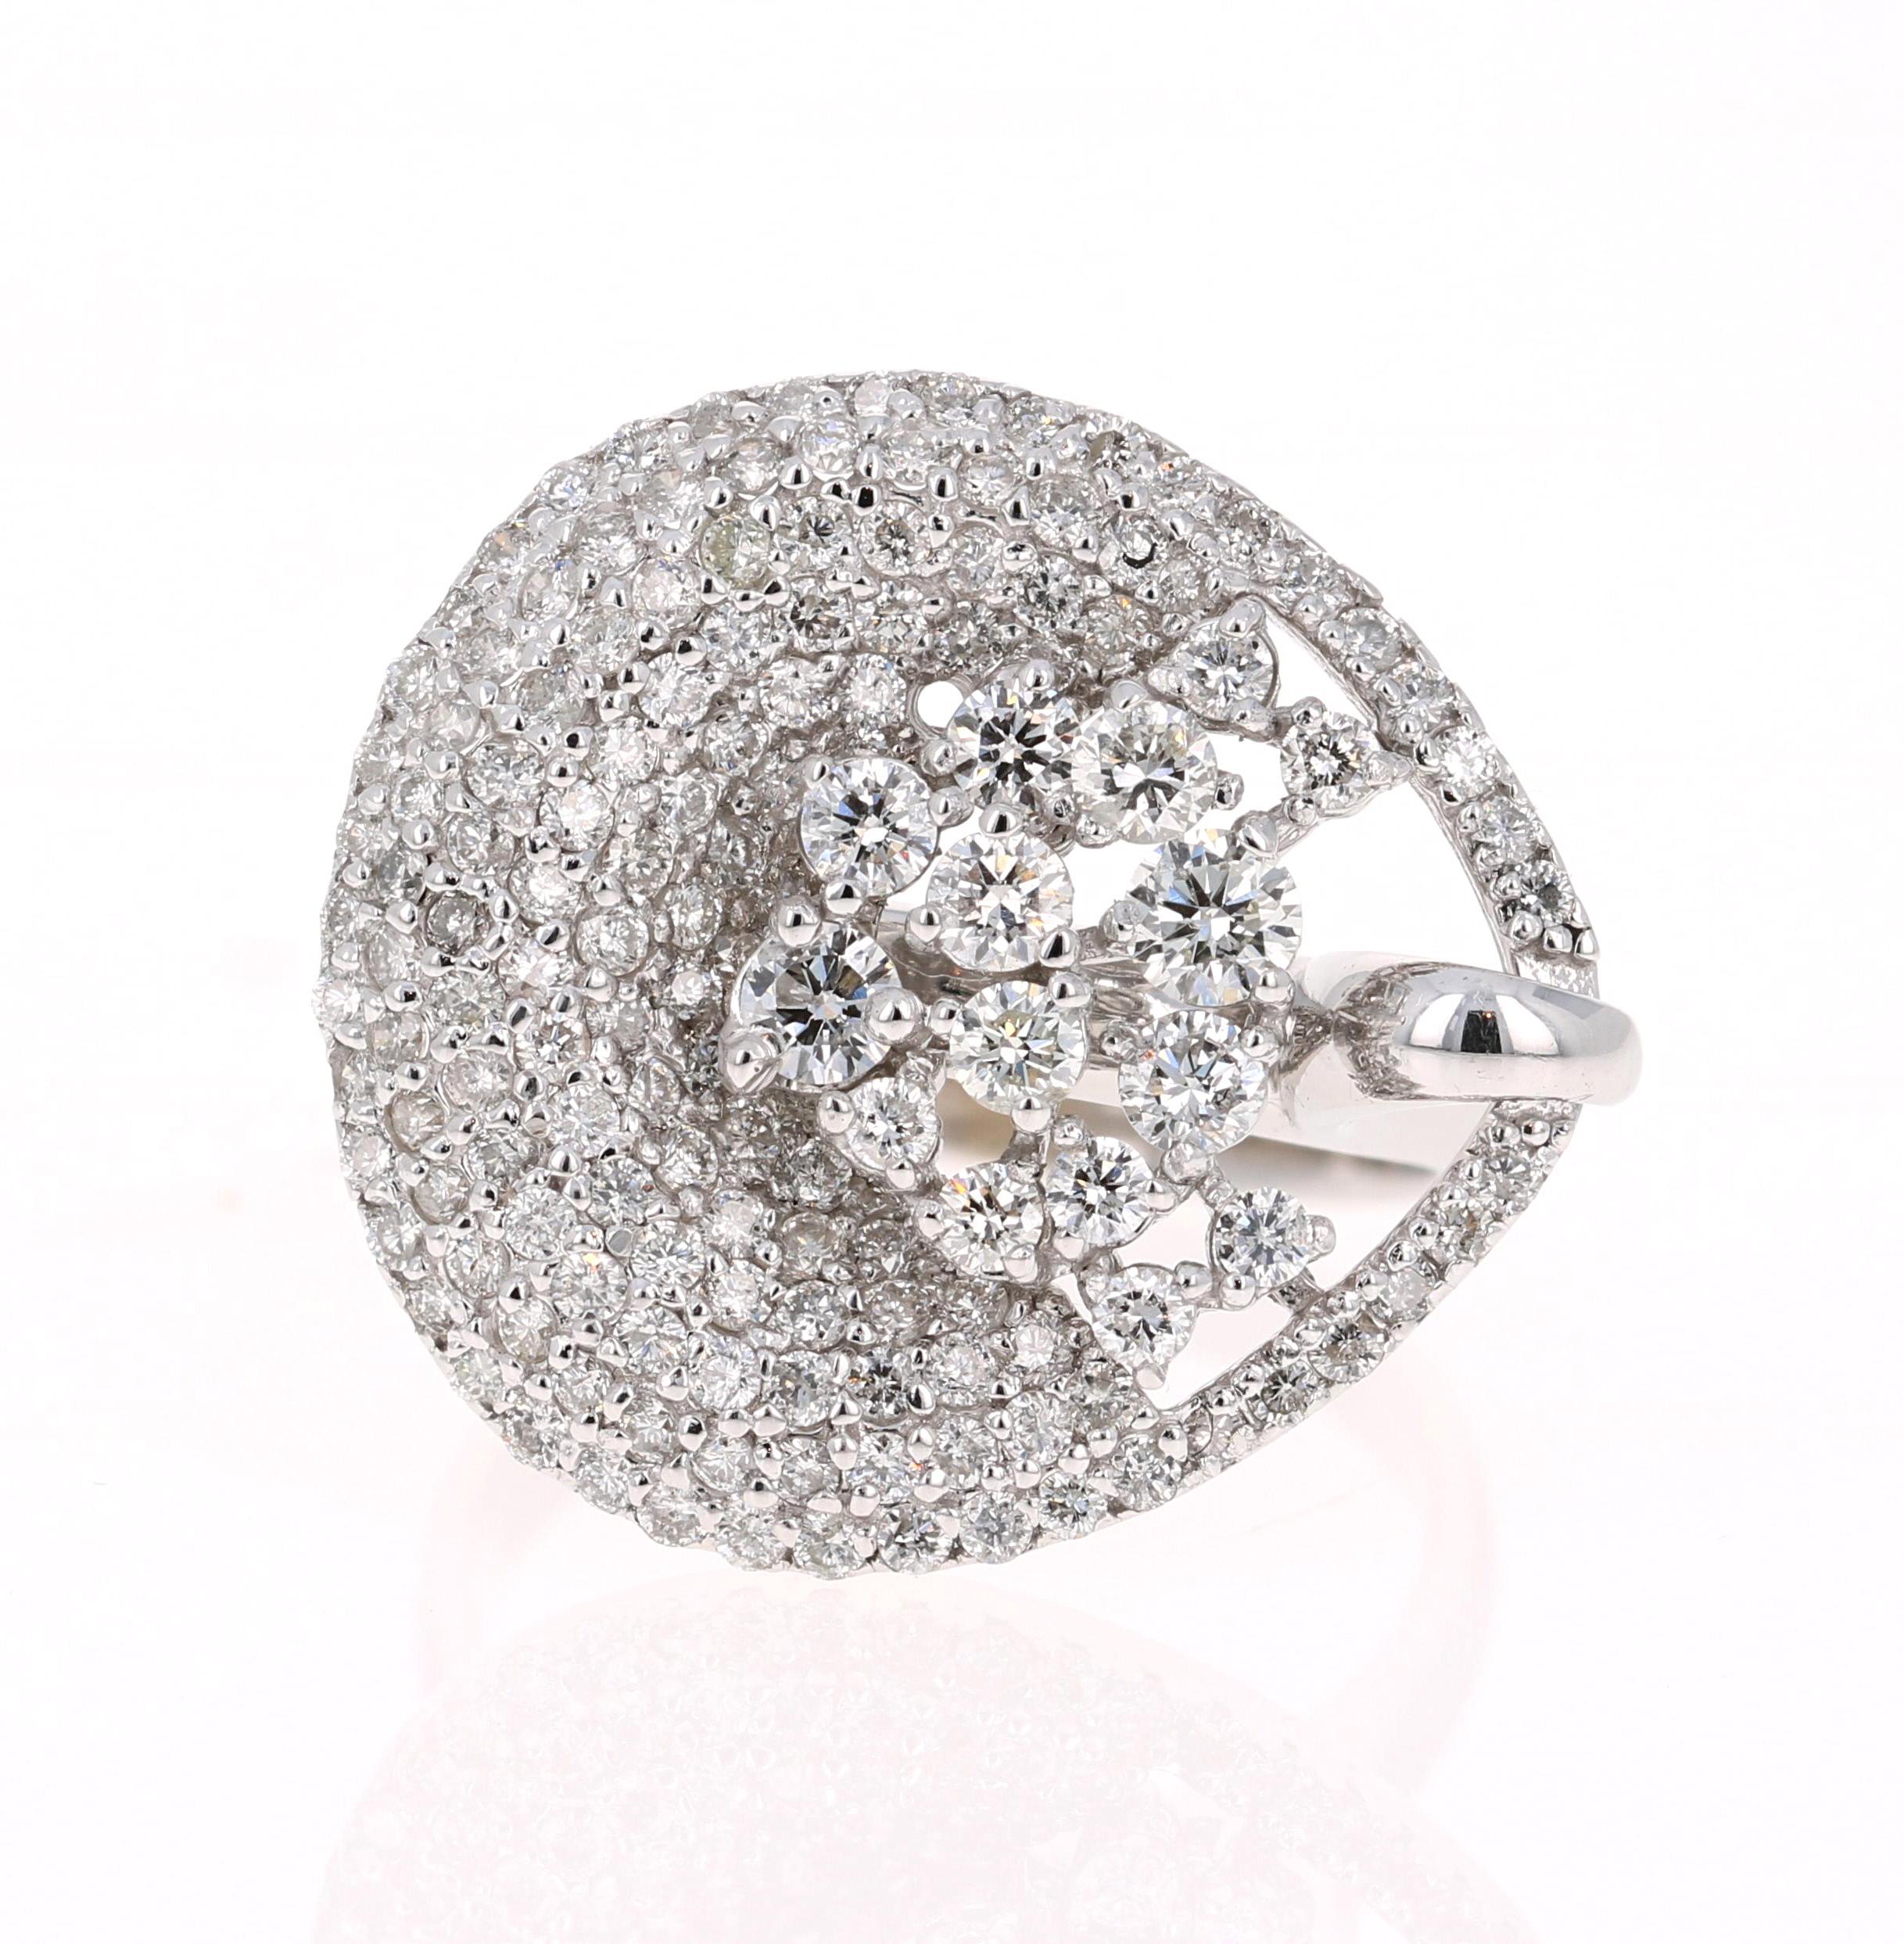 Classy Cocktail Ring with Diamonds. 

This ring has 162 Round Cut Diamonds that weigh 2.06 Carats and has a clarity and color of SI-F.  
It is crafted in 14 Karat White Gold and has an approximate weight of 8.4 grams. 

The ring is a size 7 and can